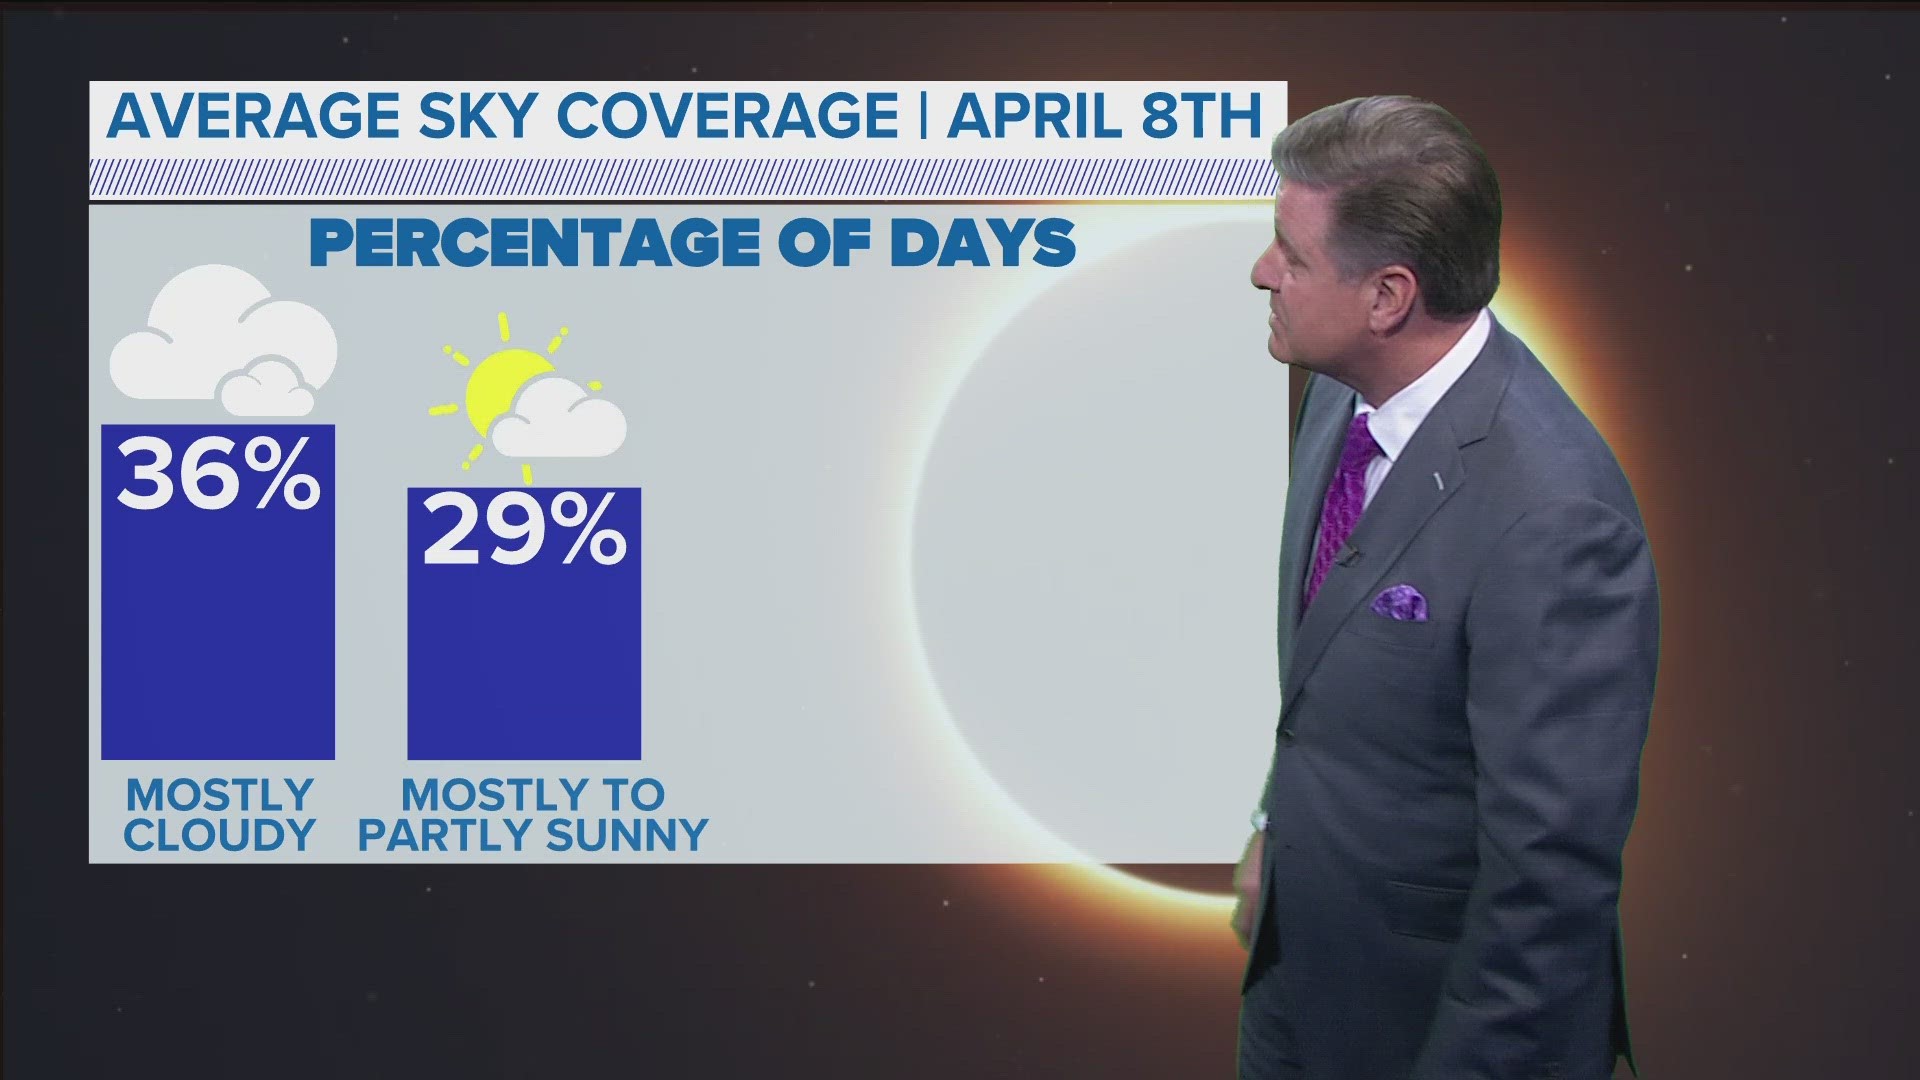 Historical data indicates the chances for a sunny day April 8 may be slim.